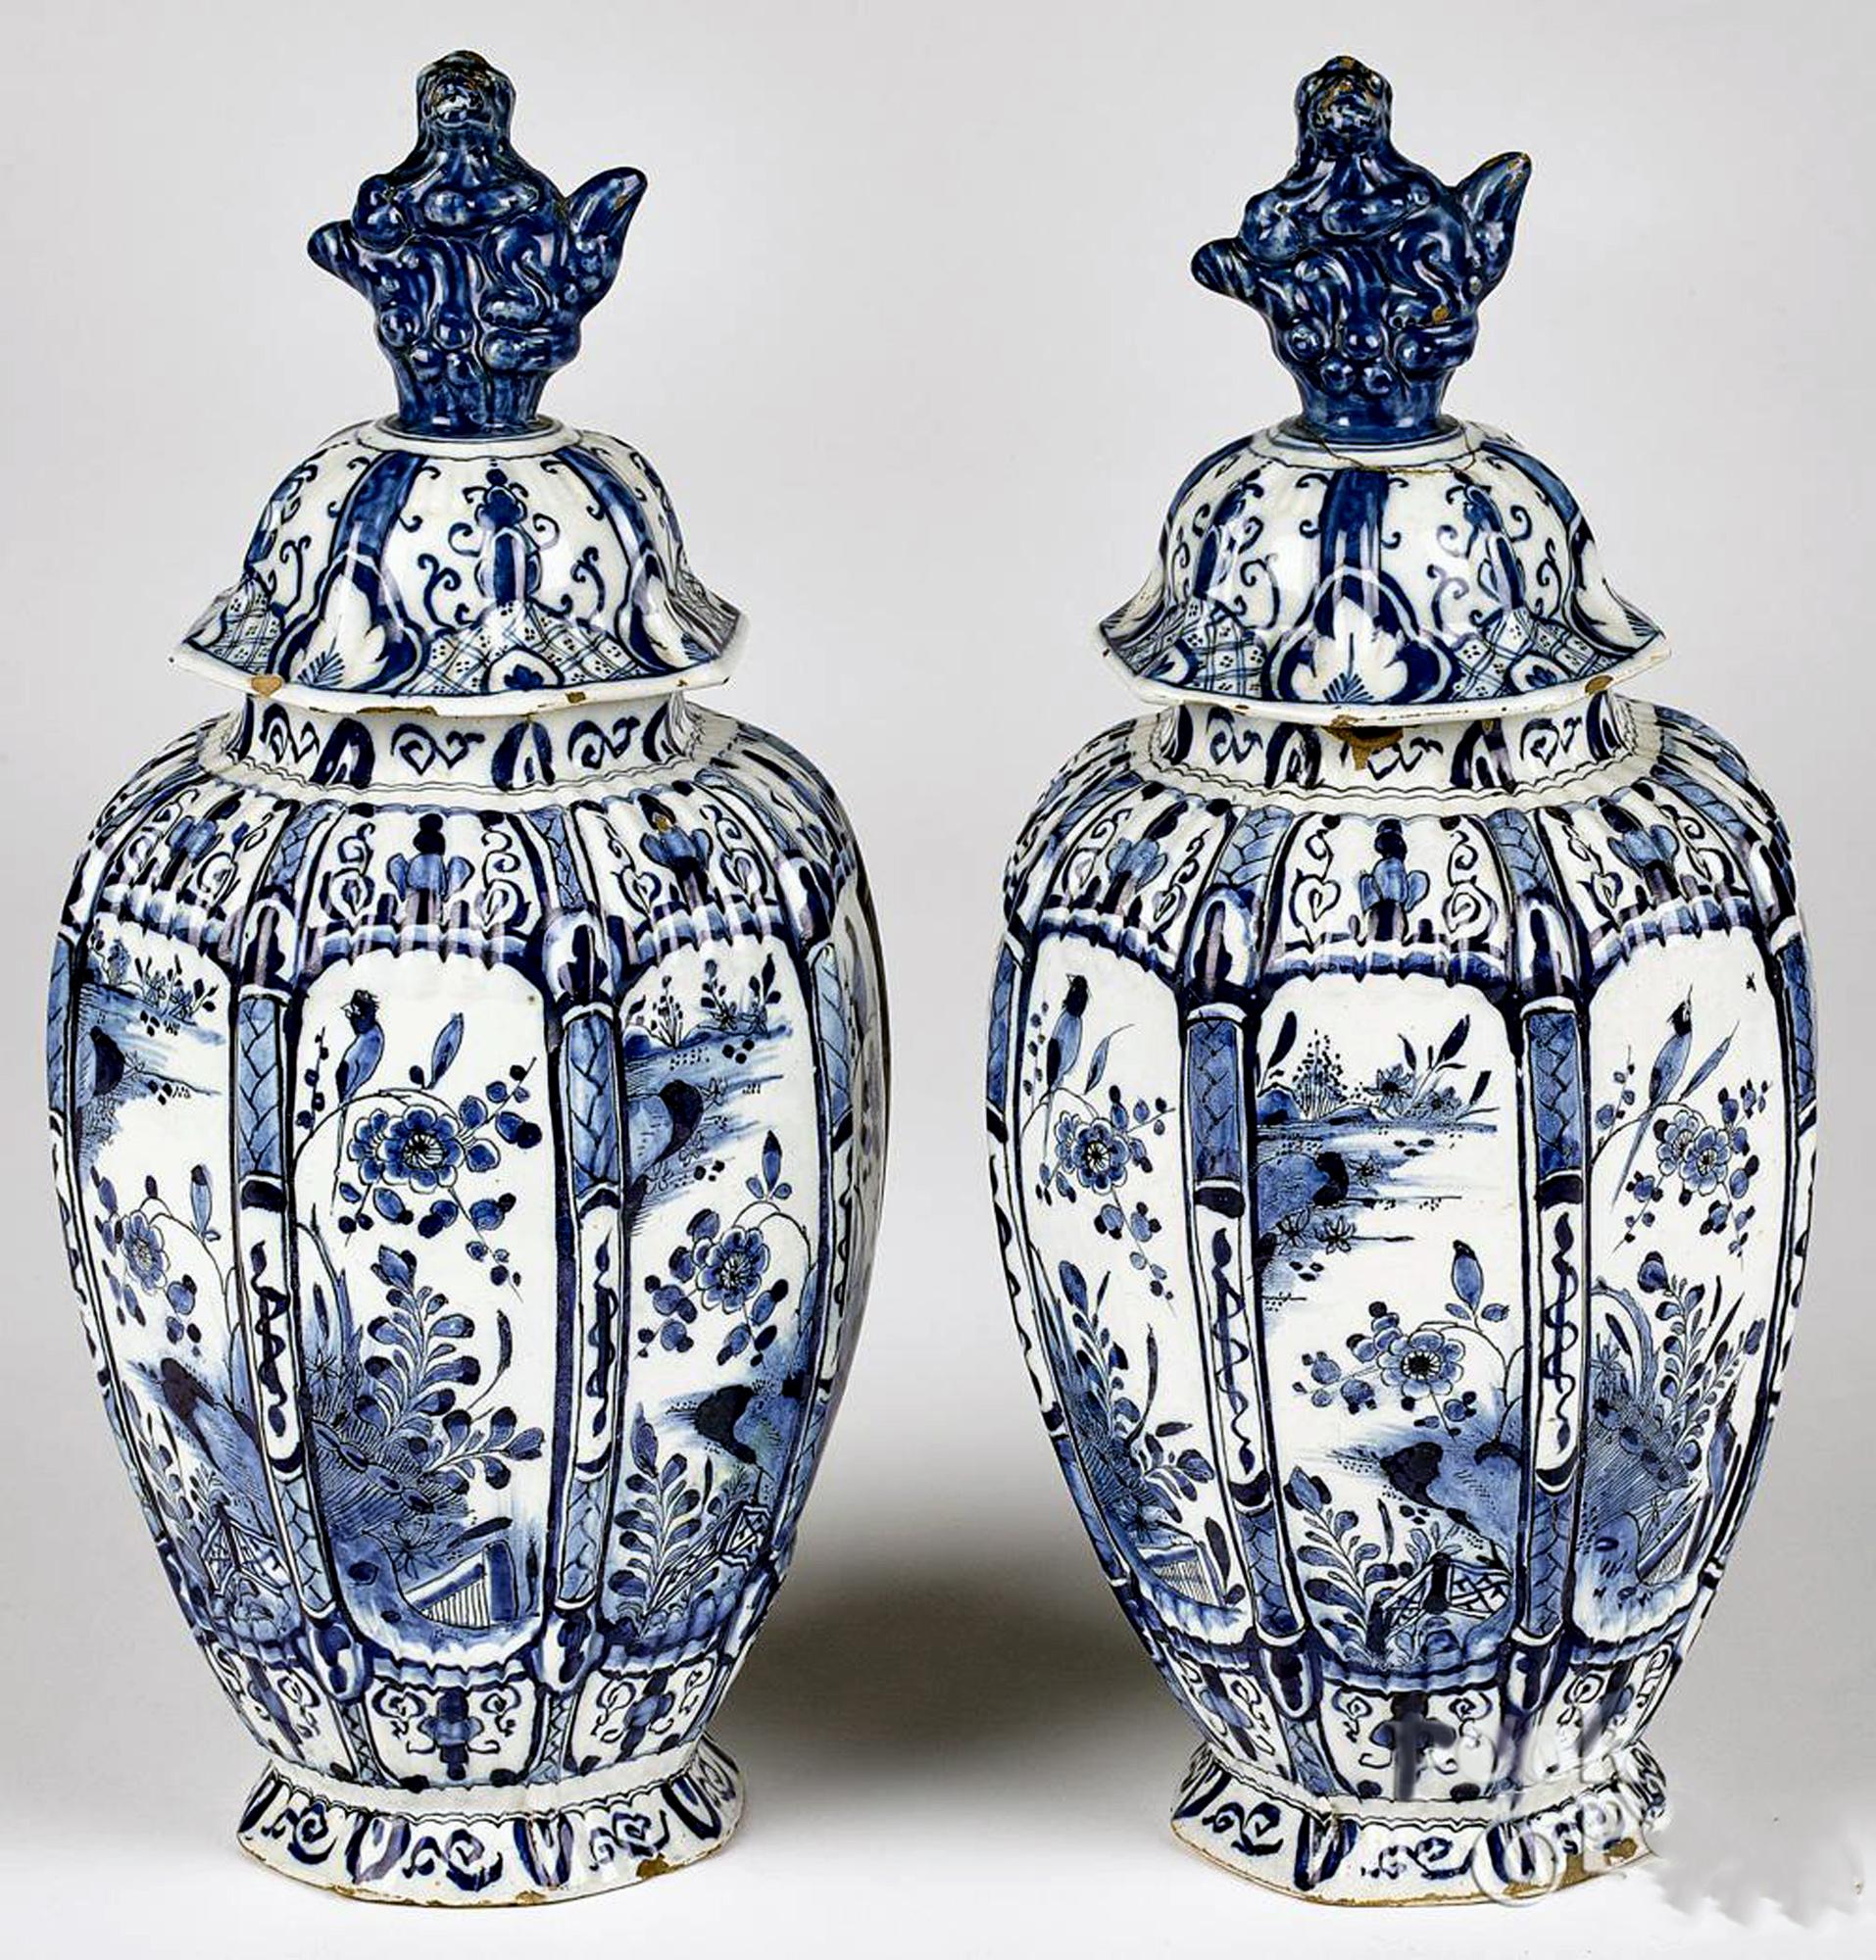 Dutch Delft Underglaze Blue & White Vases & Covers,
De Twee Scheepjes Factory ( The Two Little Ships),
Mid 18th Century

The pair of Dutch Delft octagonal shaped vases and cover are painted in underglaze blue & white with garden scenes in underglaze